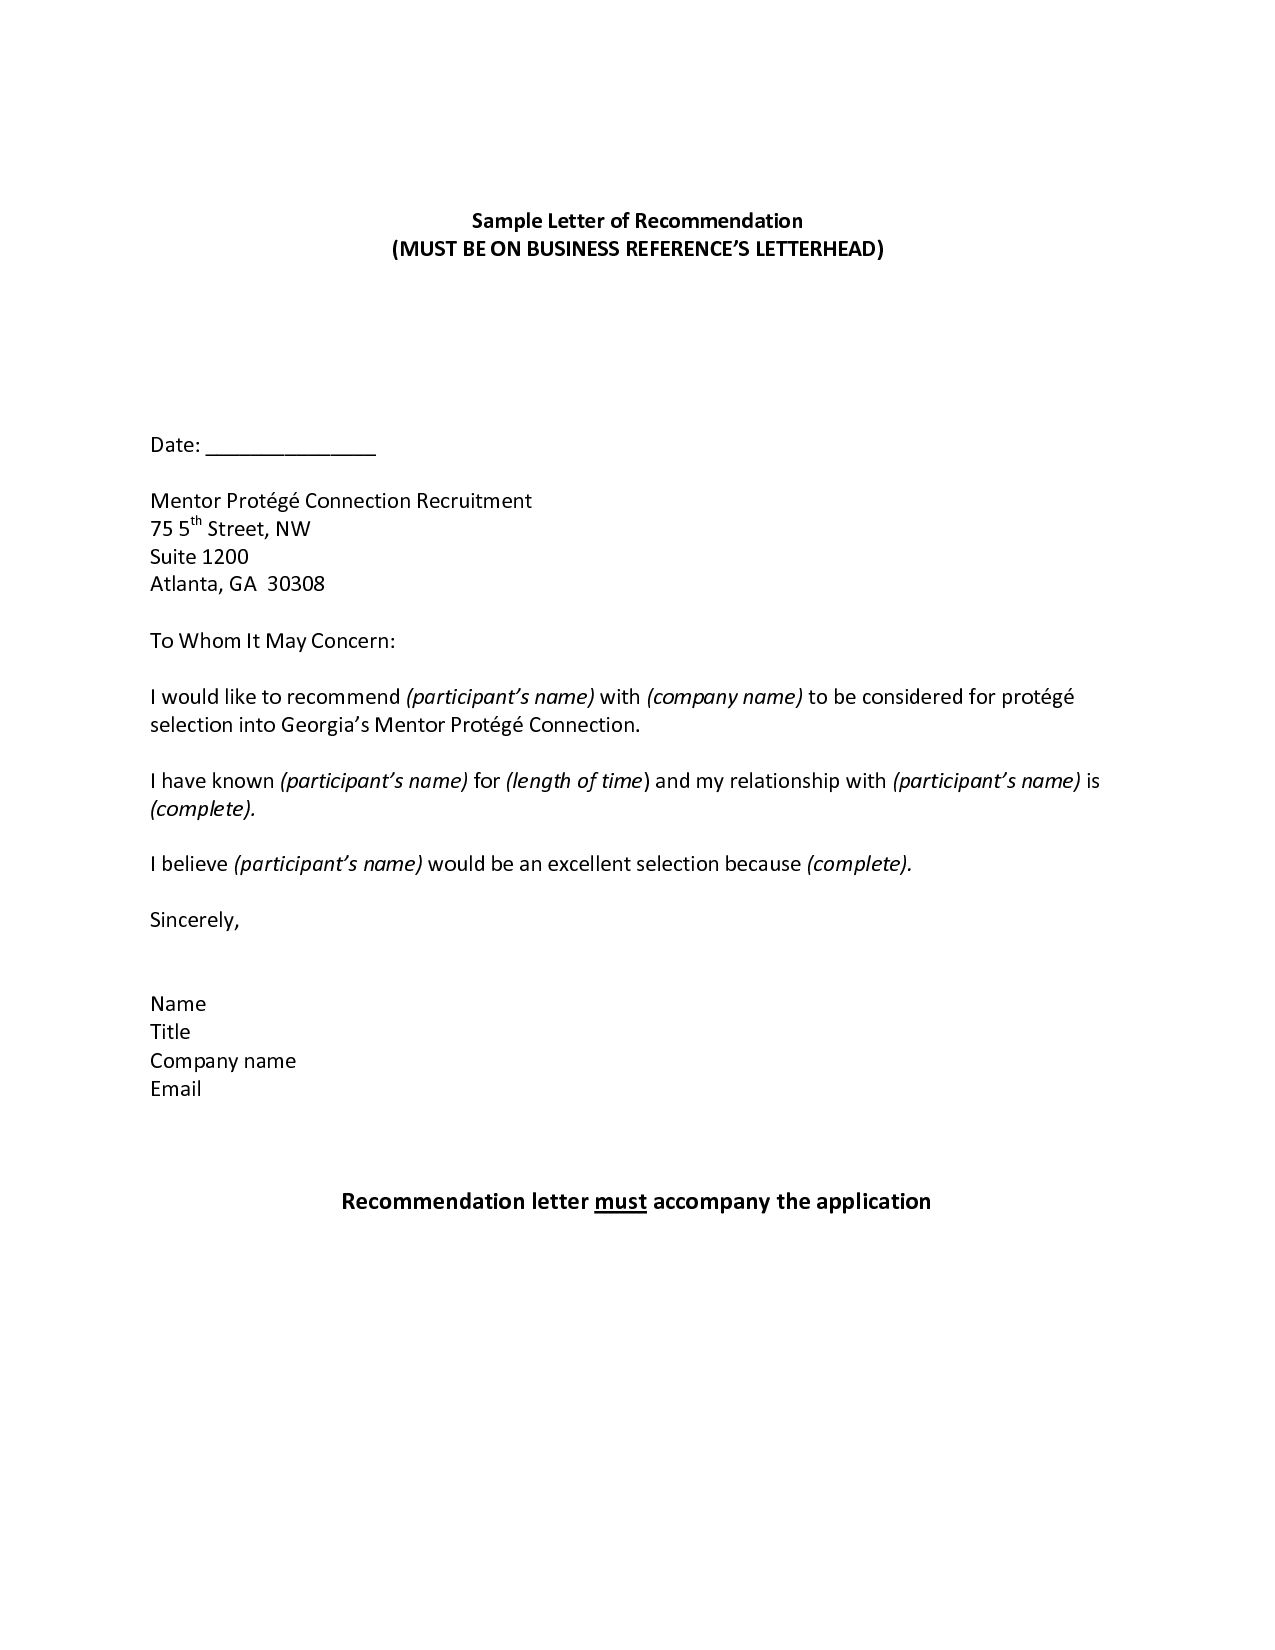 Professional Reference Sample Recommendation Letter Jos inside measurements 1275 X 1650